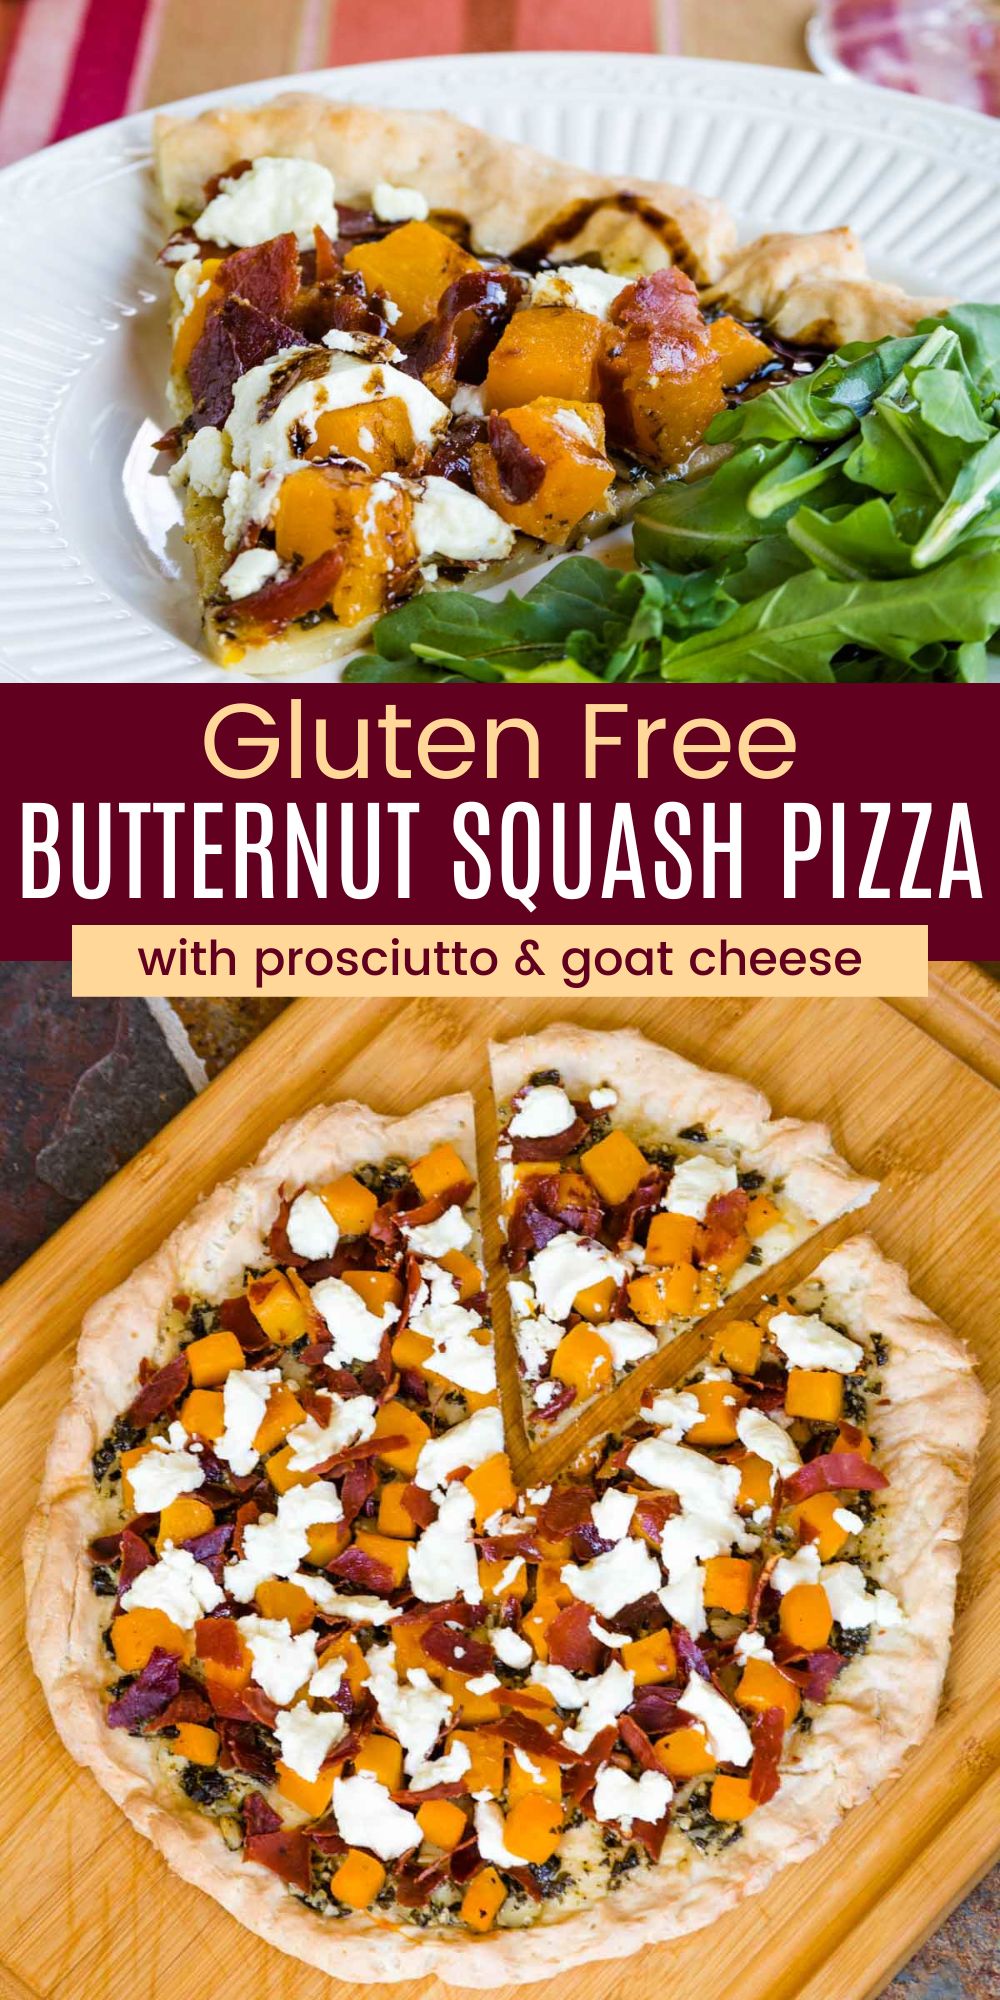 Roasted Butternut Squash Pizza | Cupcakes & Kale Chips